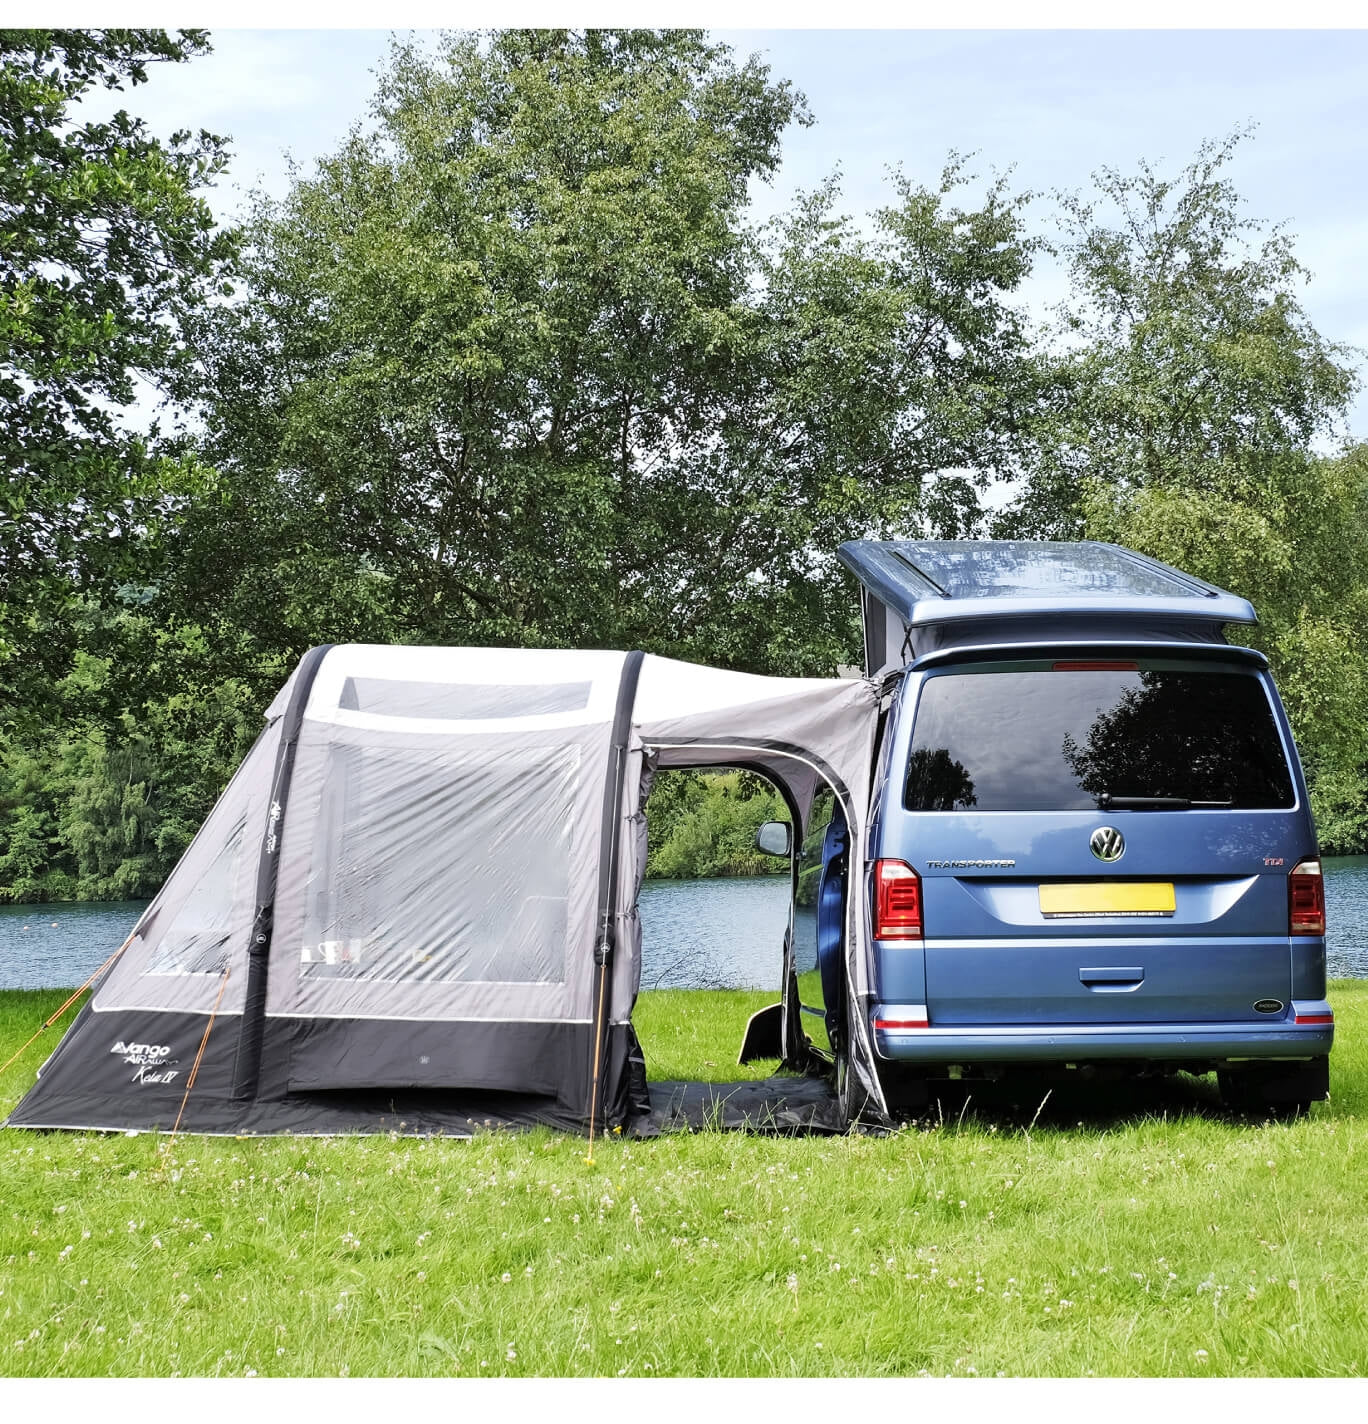 Side view of the Vango Kela attached to a VW camper